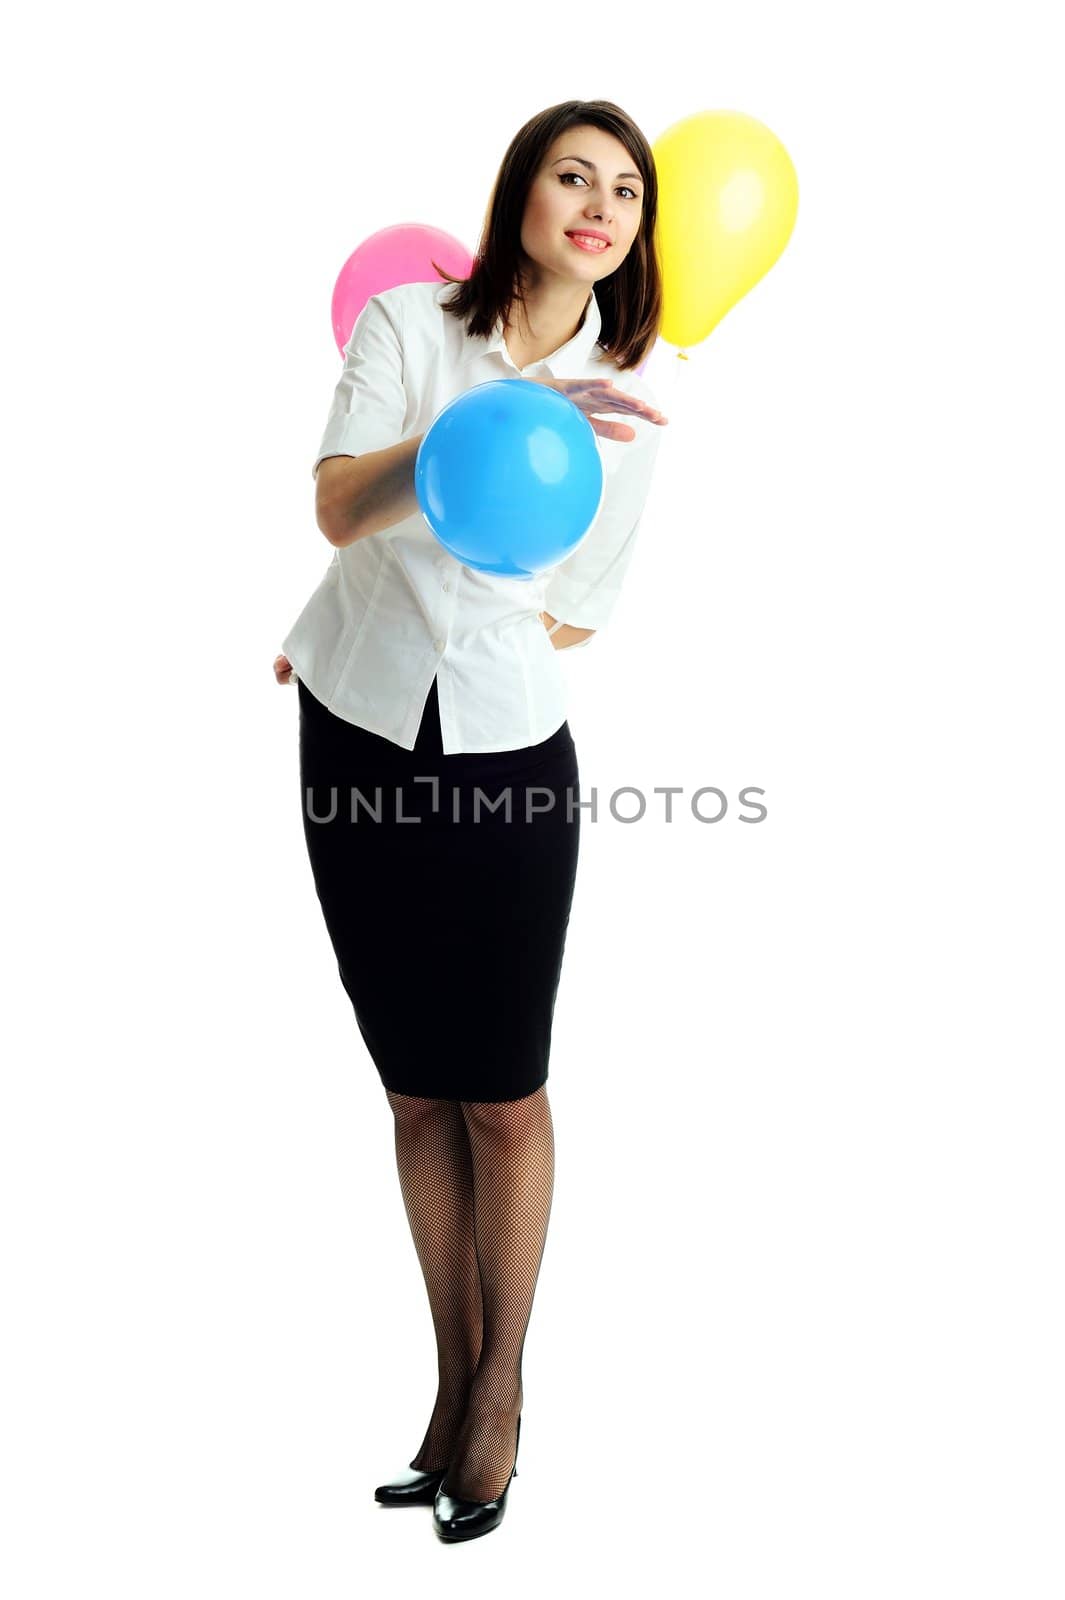 An image of a young beautiful woman with balloons